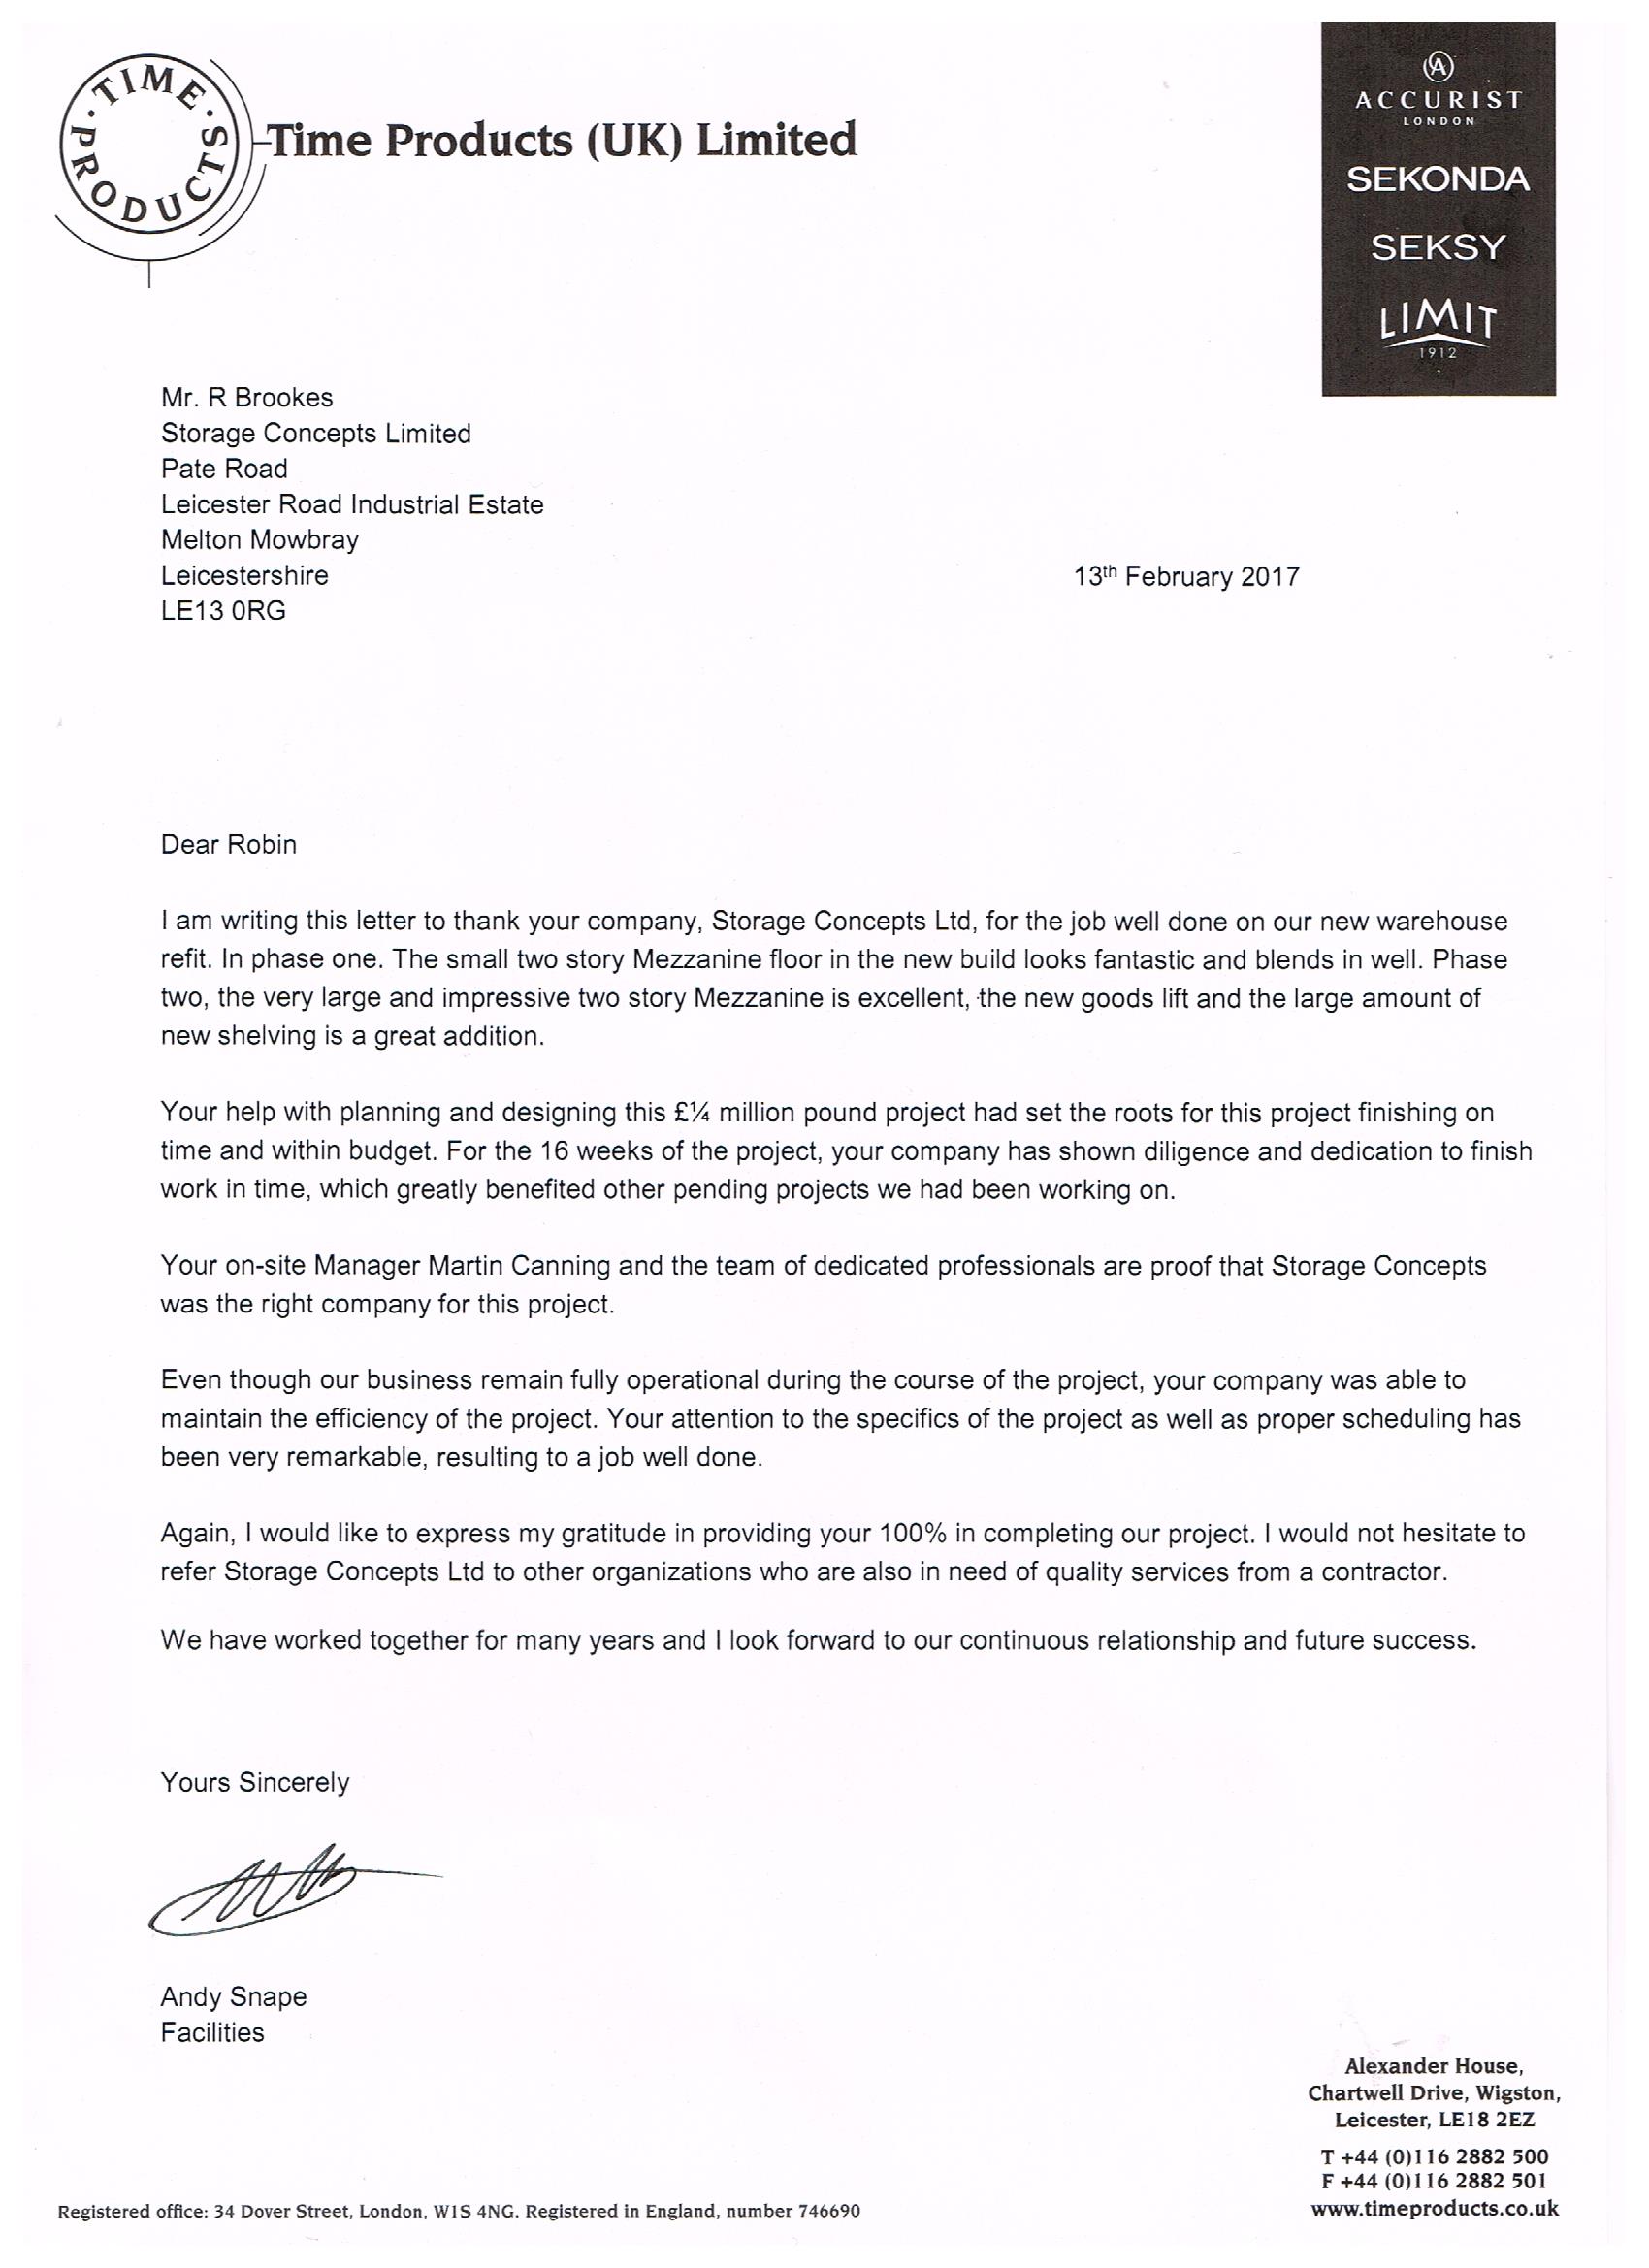 Letter Of Appreciation For A Job Well Done from storageconcepts.co.uk